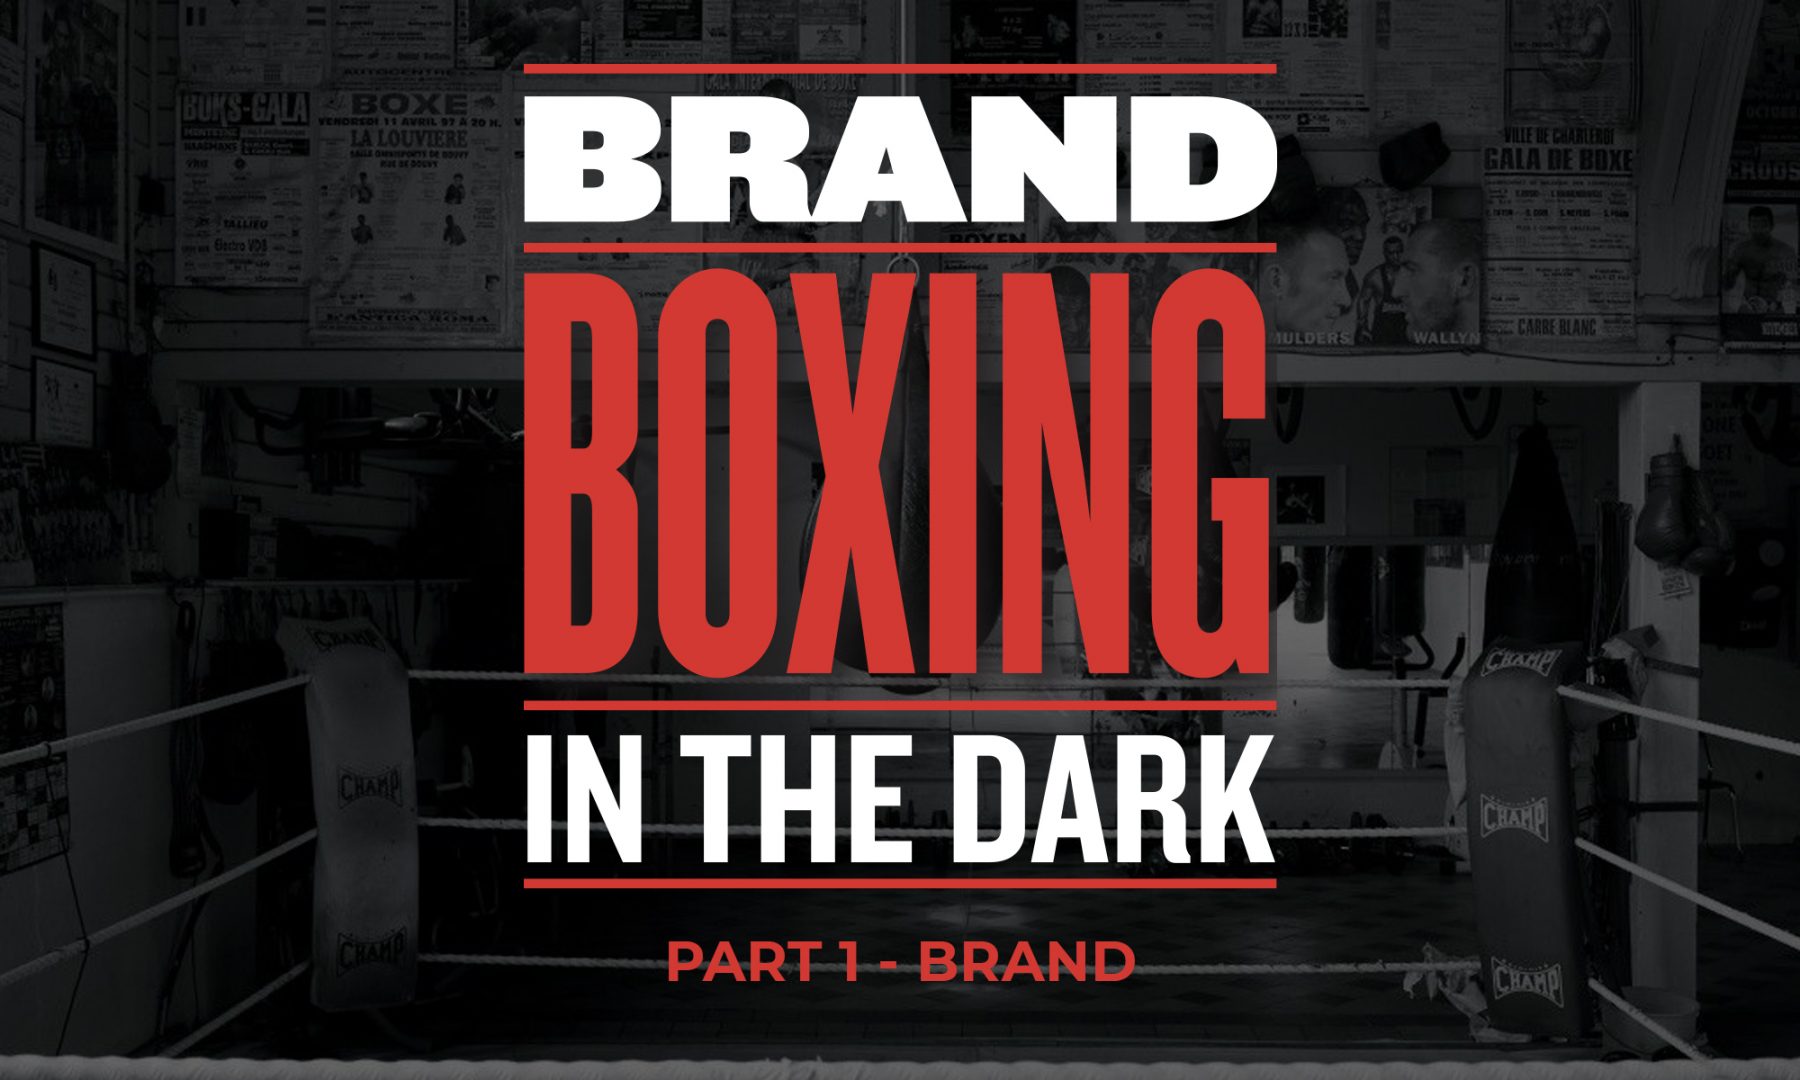 Our new series exploring a concept we call Brand Boxing in the Dark. Most businesses we see have NO IDEA about their own brand or the ecosystem they are operating and 'fighting' in. How can you get ahead when you have zero clarity about what to do. This series explores four parts to look to get you started. Part 1 is understanding your own brand.